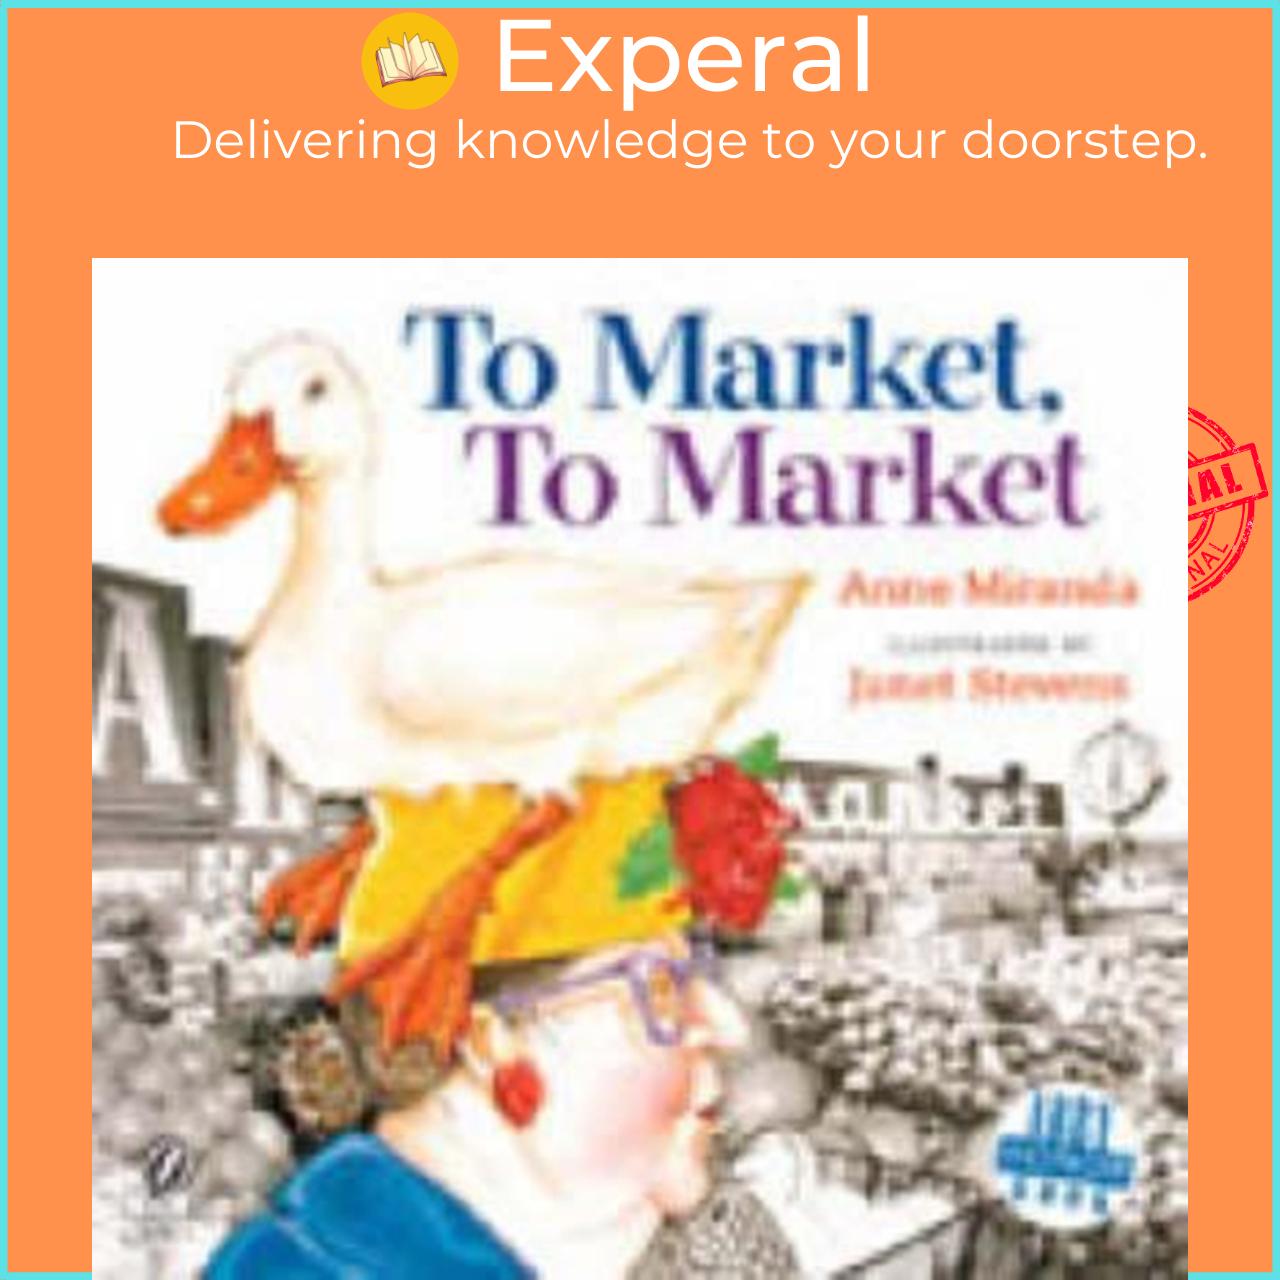 Sách - To Market, to Market by Anne Miranda (US edition, paperback)